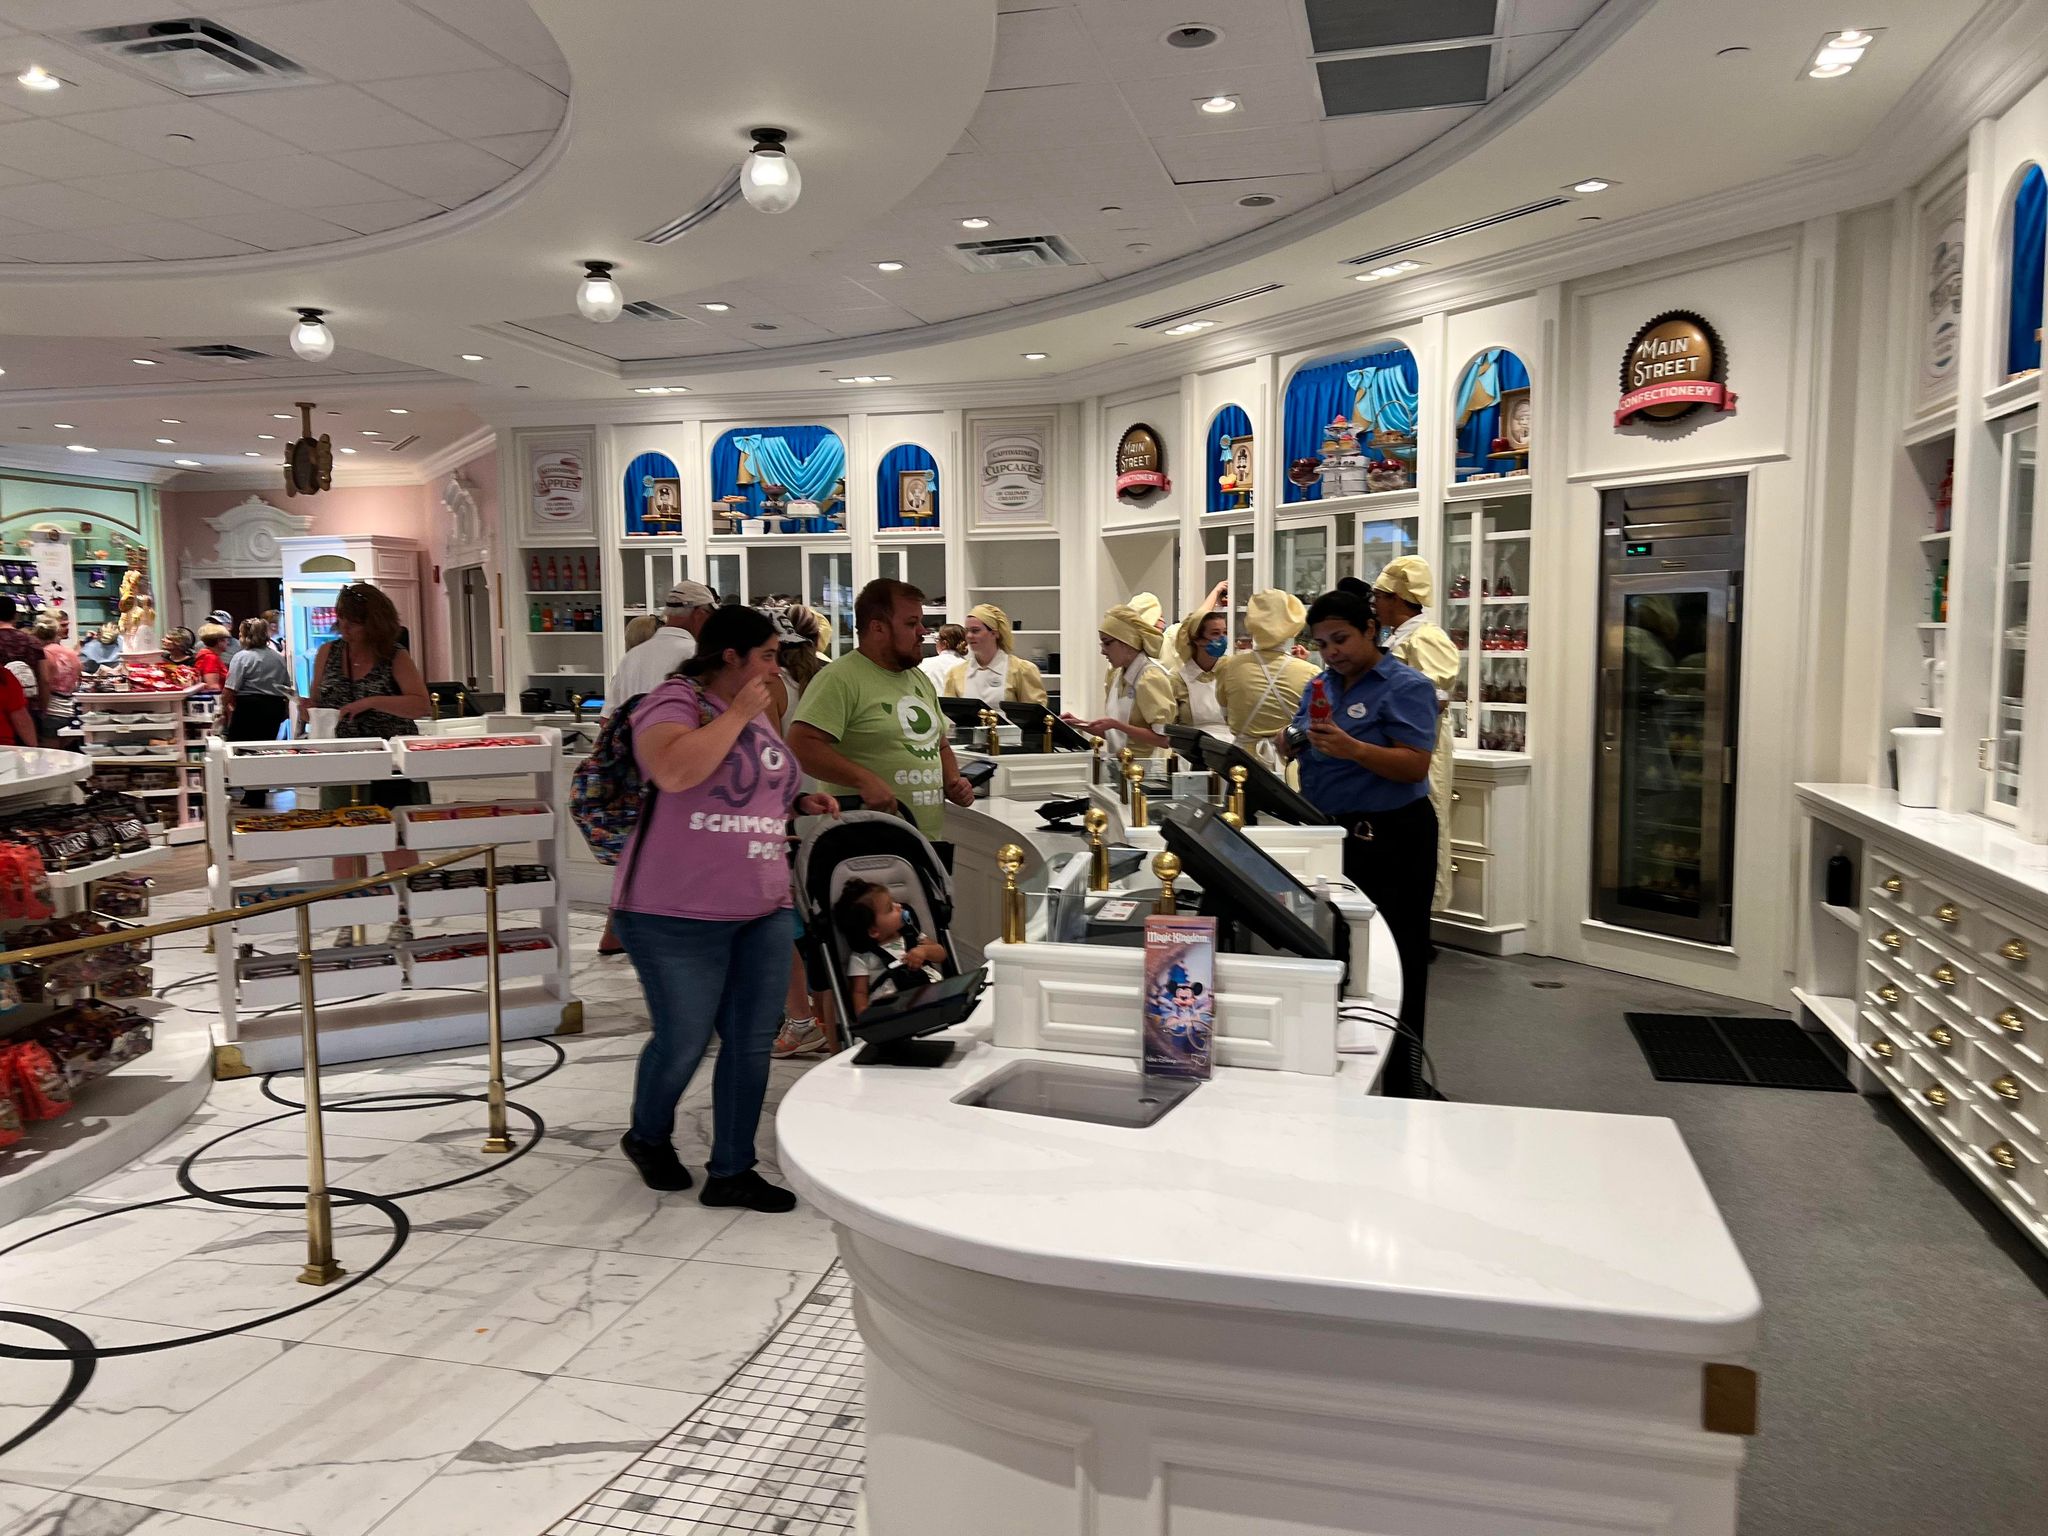 See What's Cooking In the Beautifully Remodeled Main Street Confectionary Magic Kingdom 16